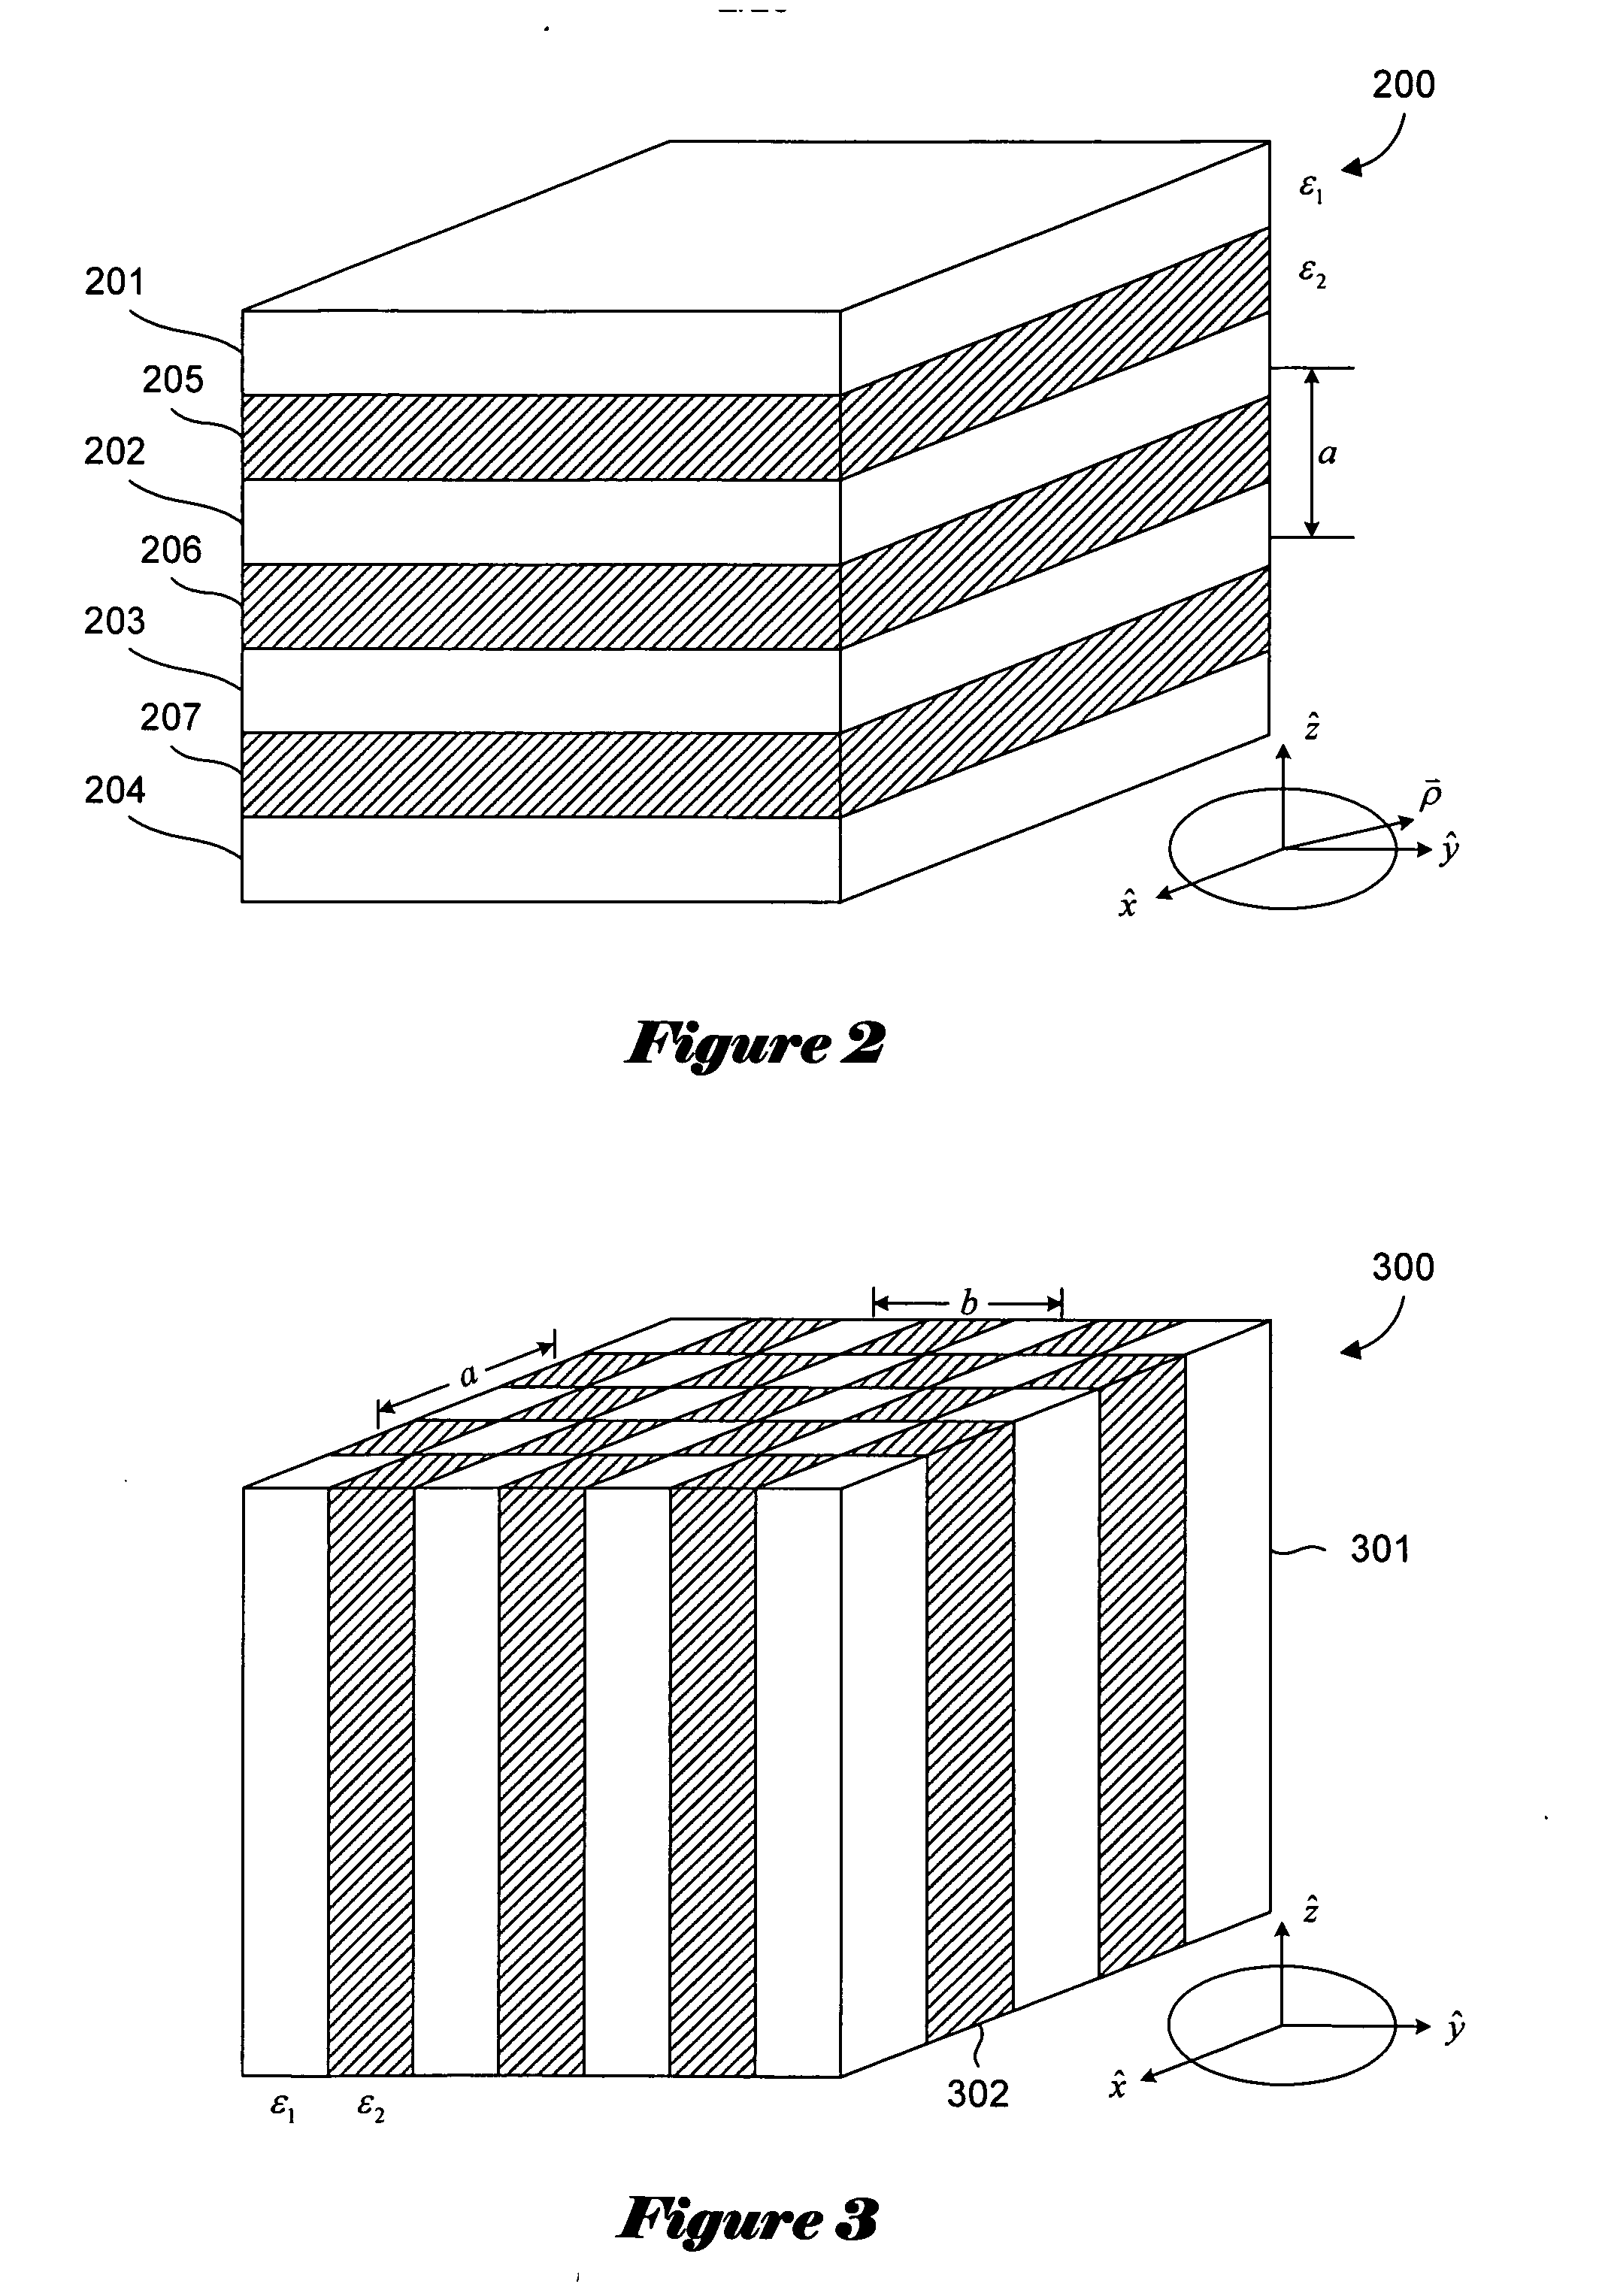 Photonic interconnections that include optical transmission paths for transmitting optical signals